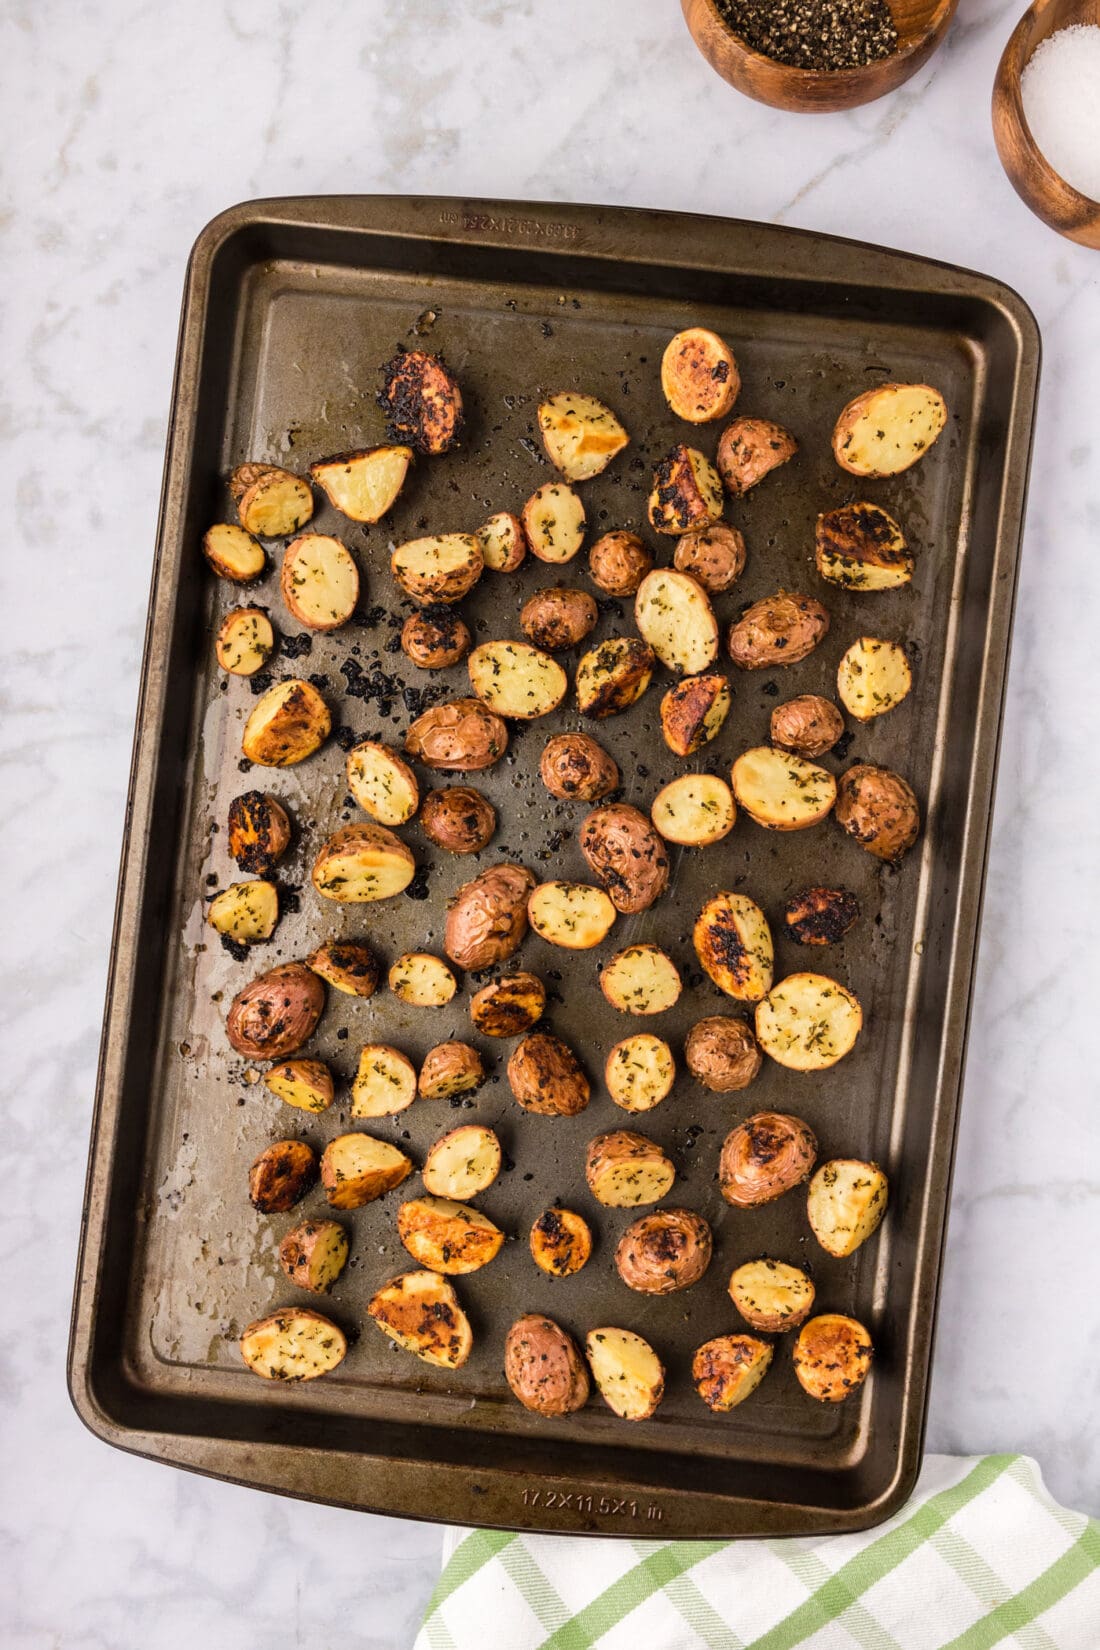 Roasted Red Potatoes fresh out of the oven on a sheet pan